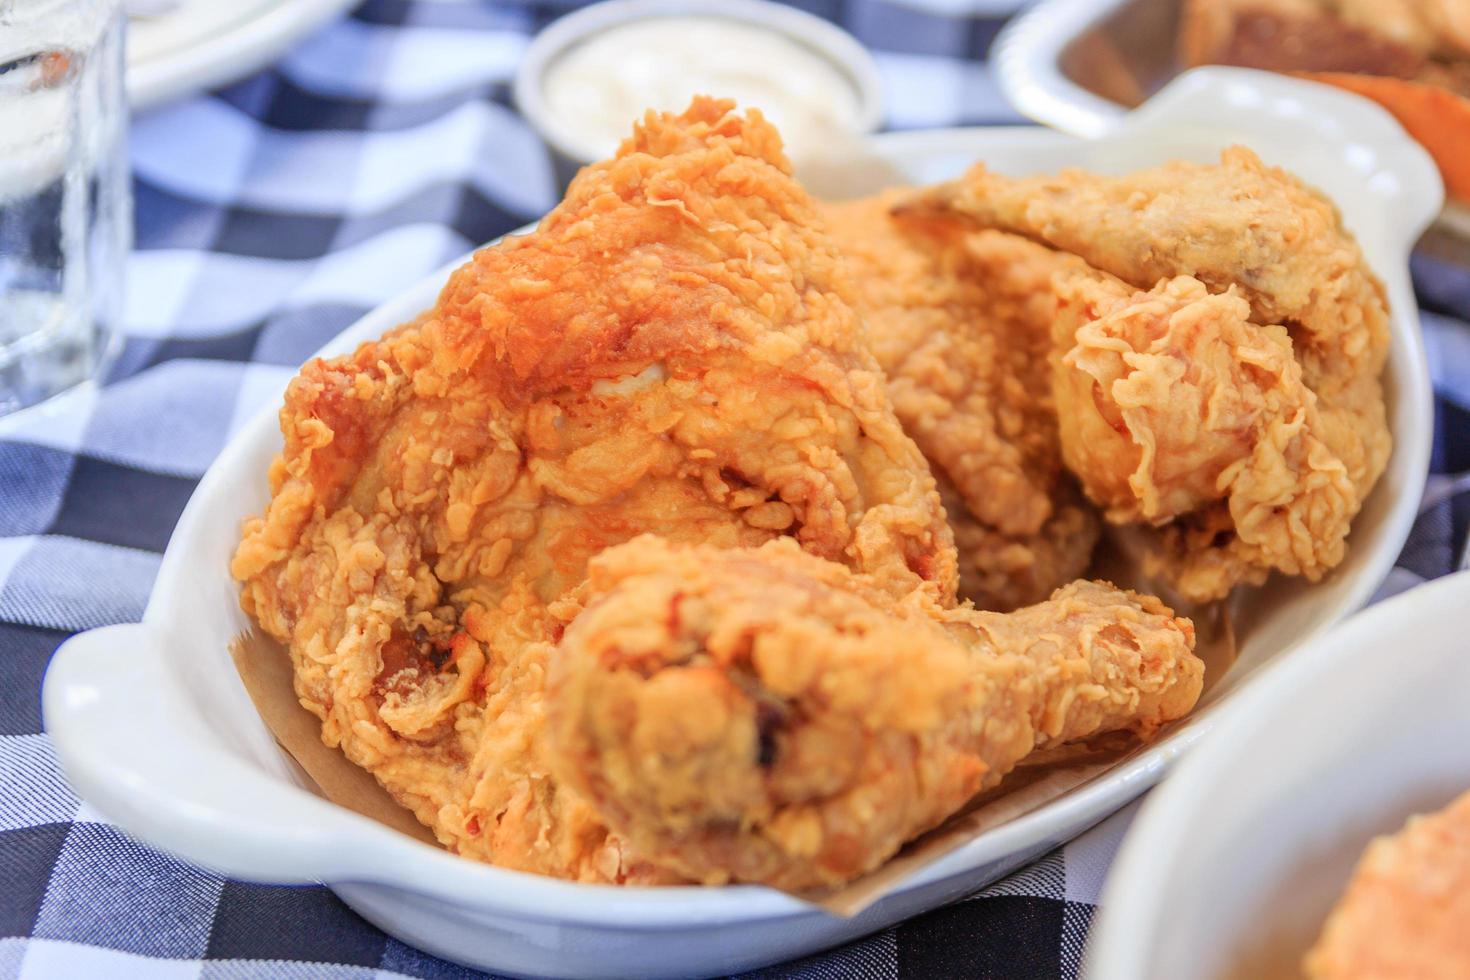 A plate of fresh, hot, crispy fried chicken photo